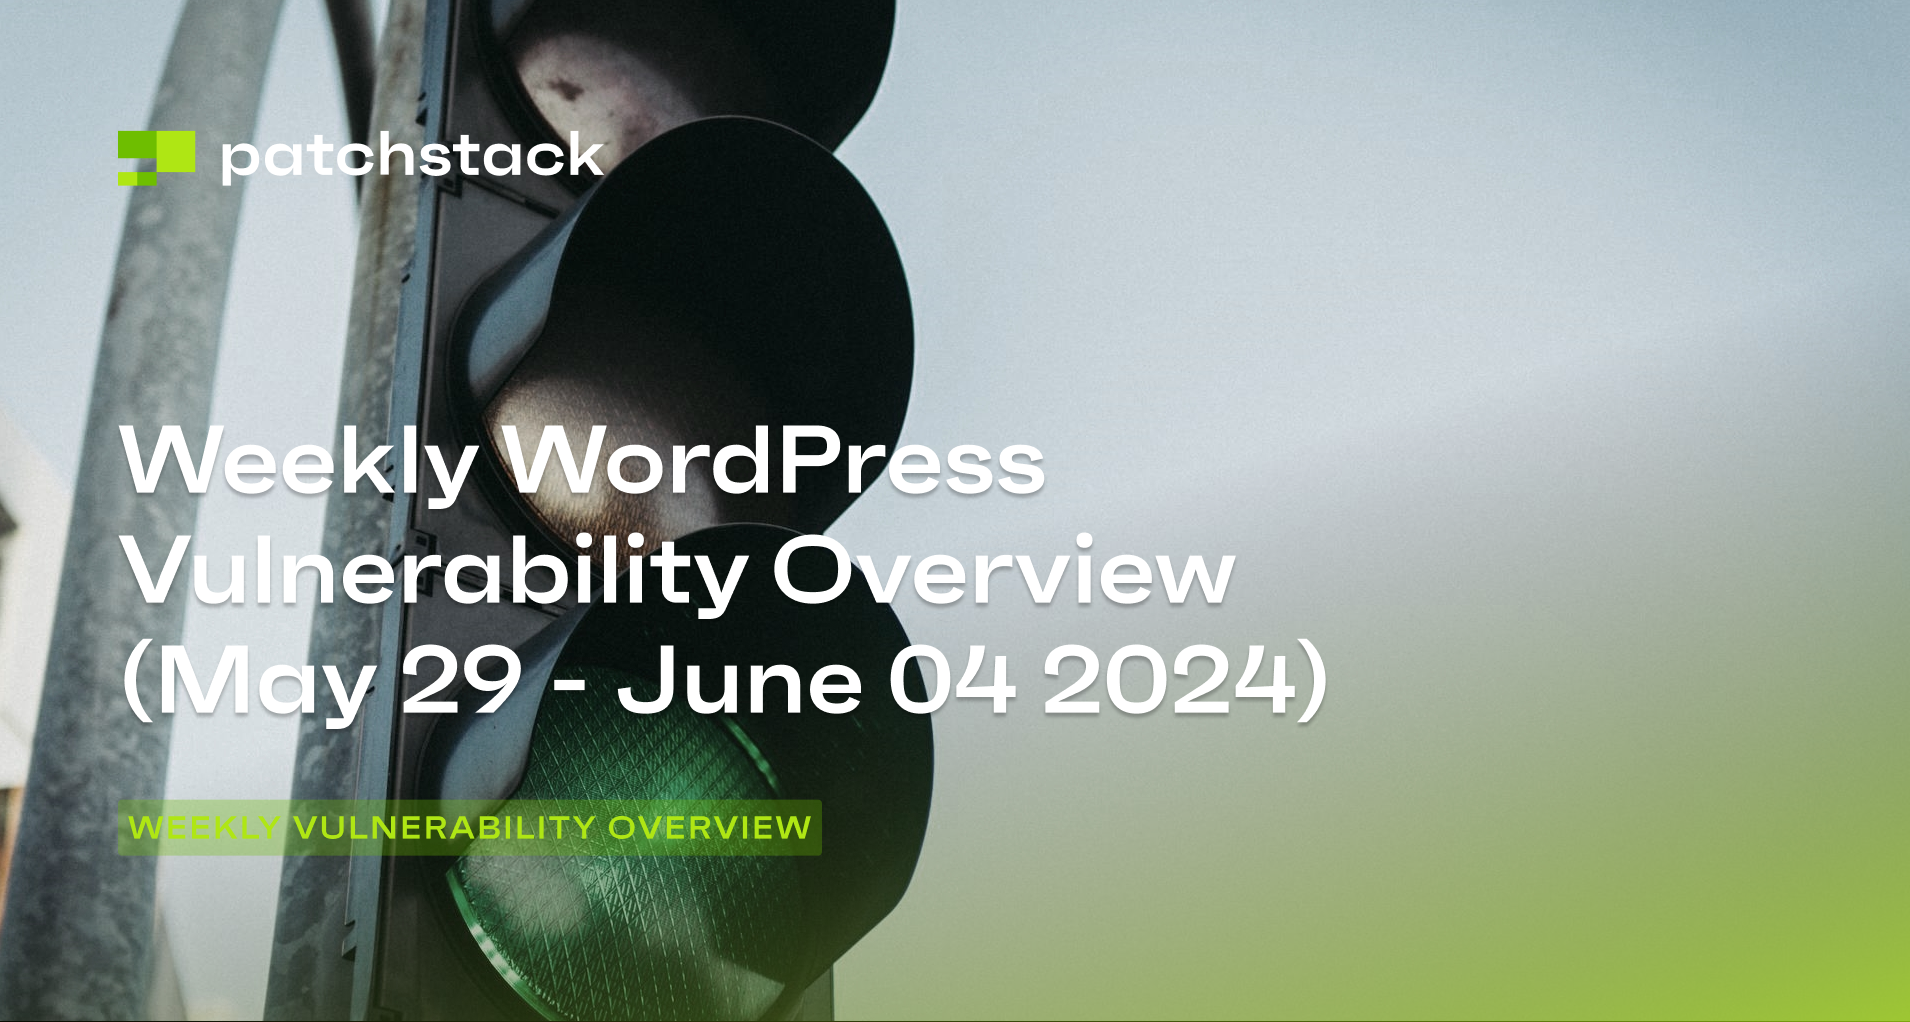 Patchstack WordPress weekly vulnerability overview